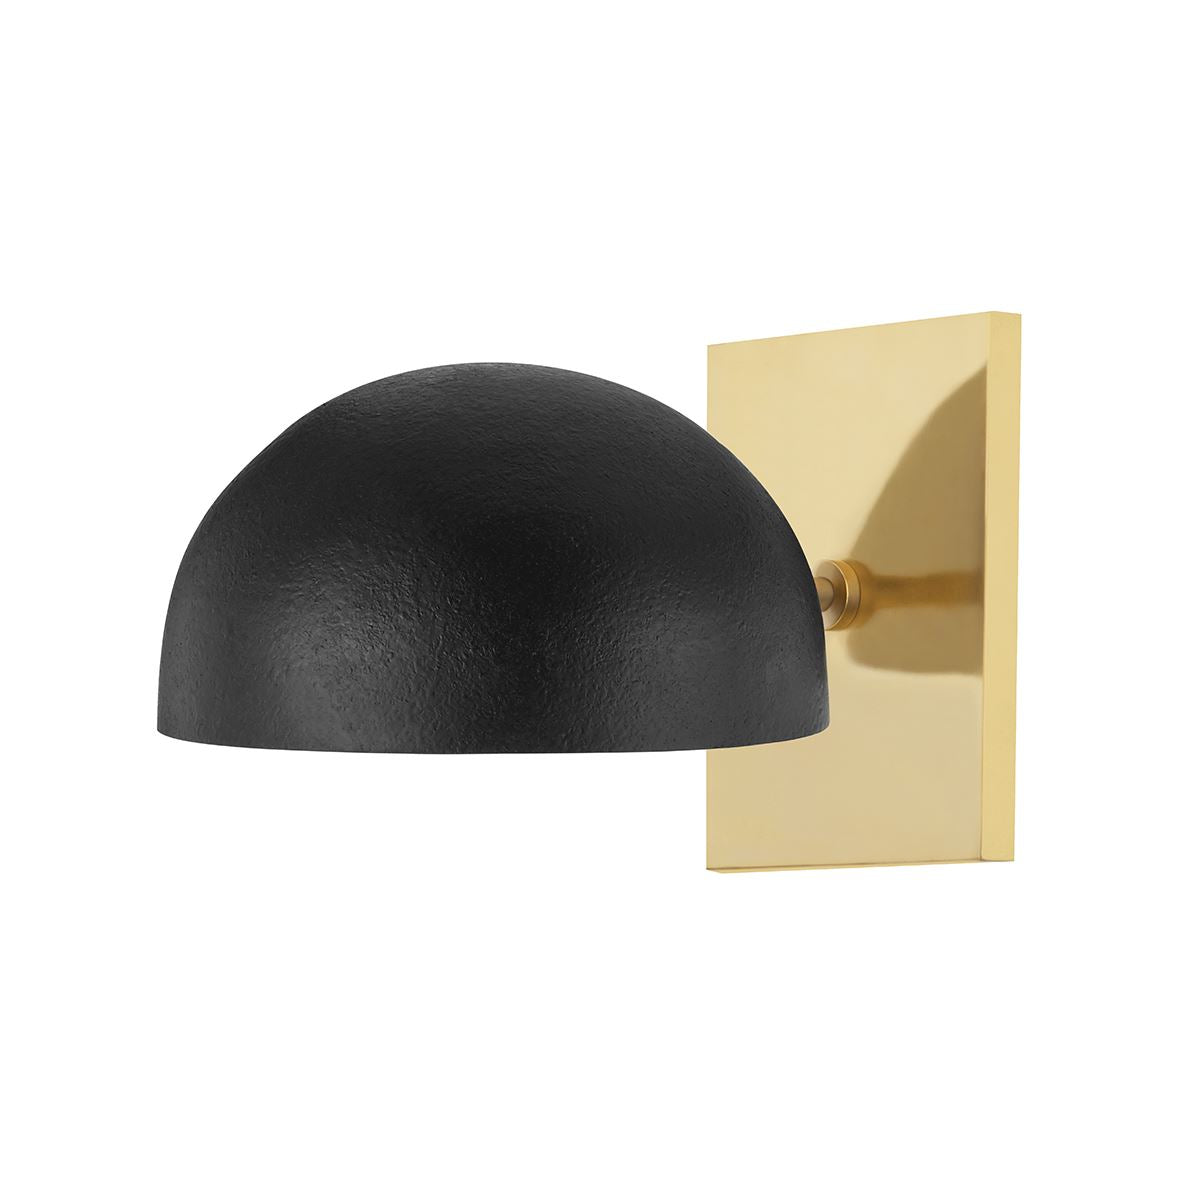 Chance Sconce Black Plaster. Right angle view.